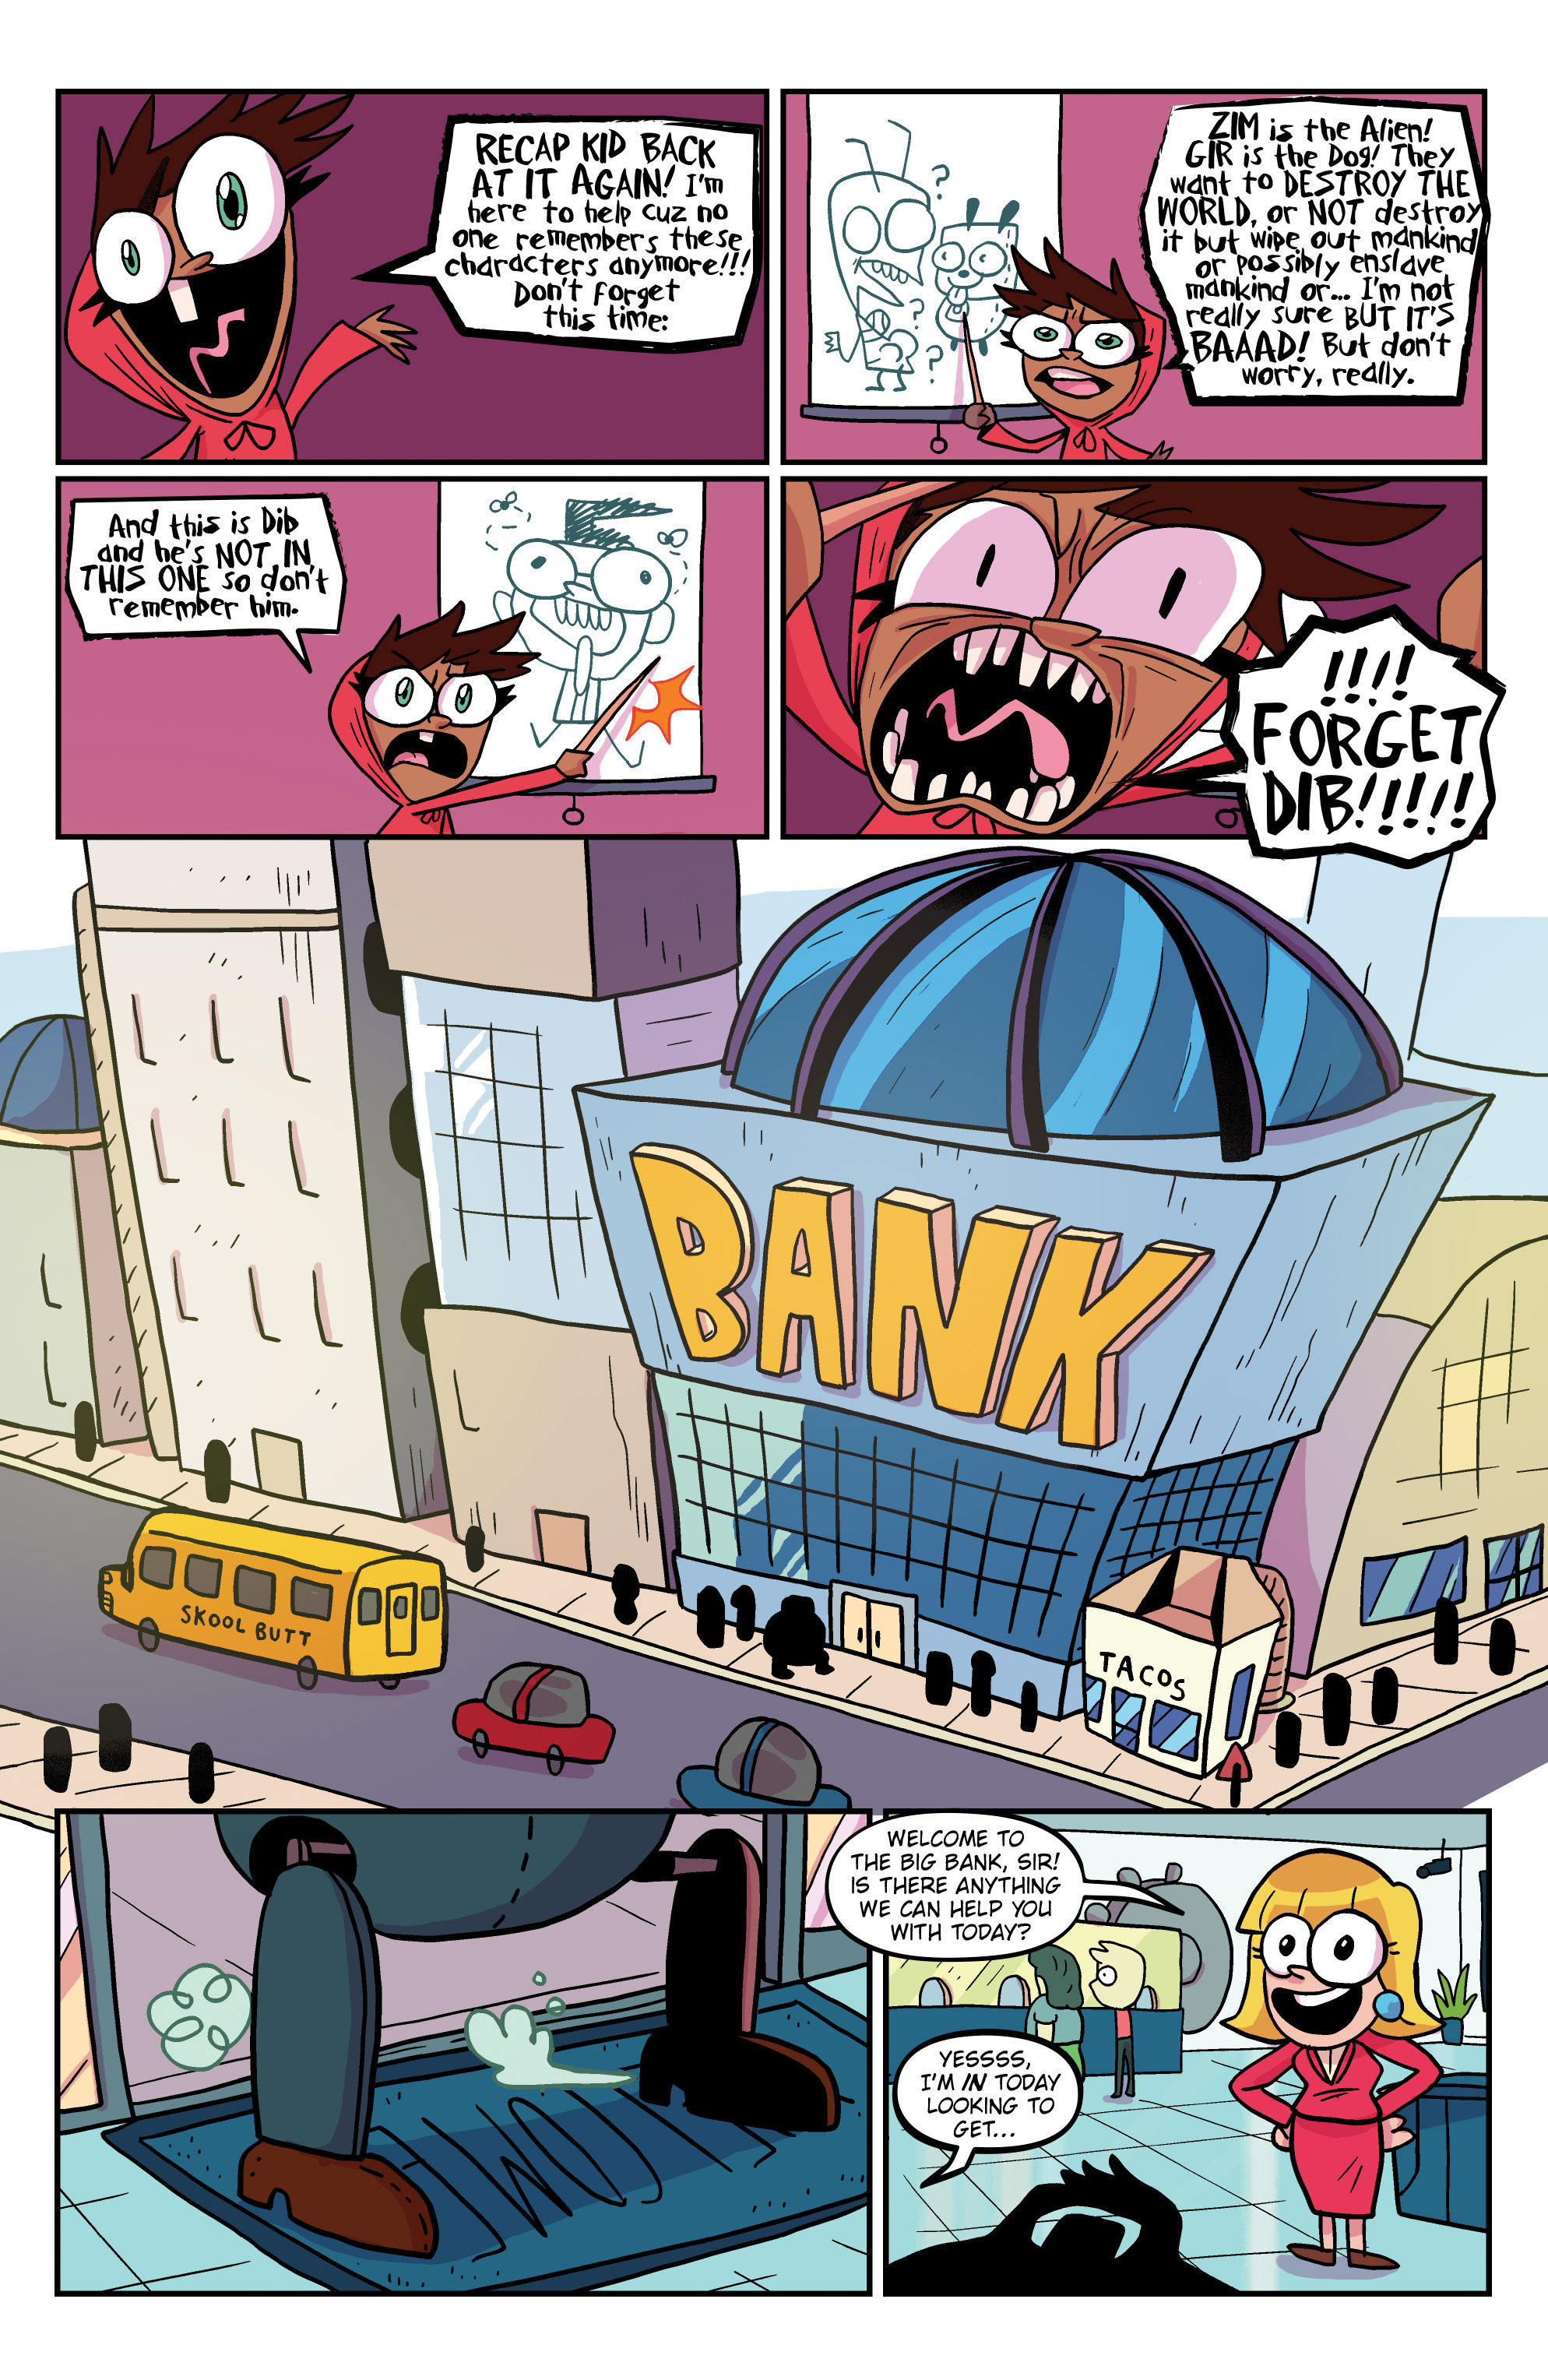 Invader Zim (2015-): Chapter 6 - Page 3